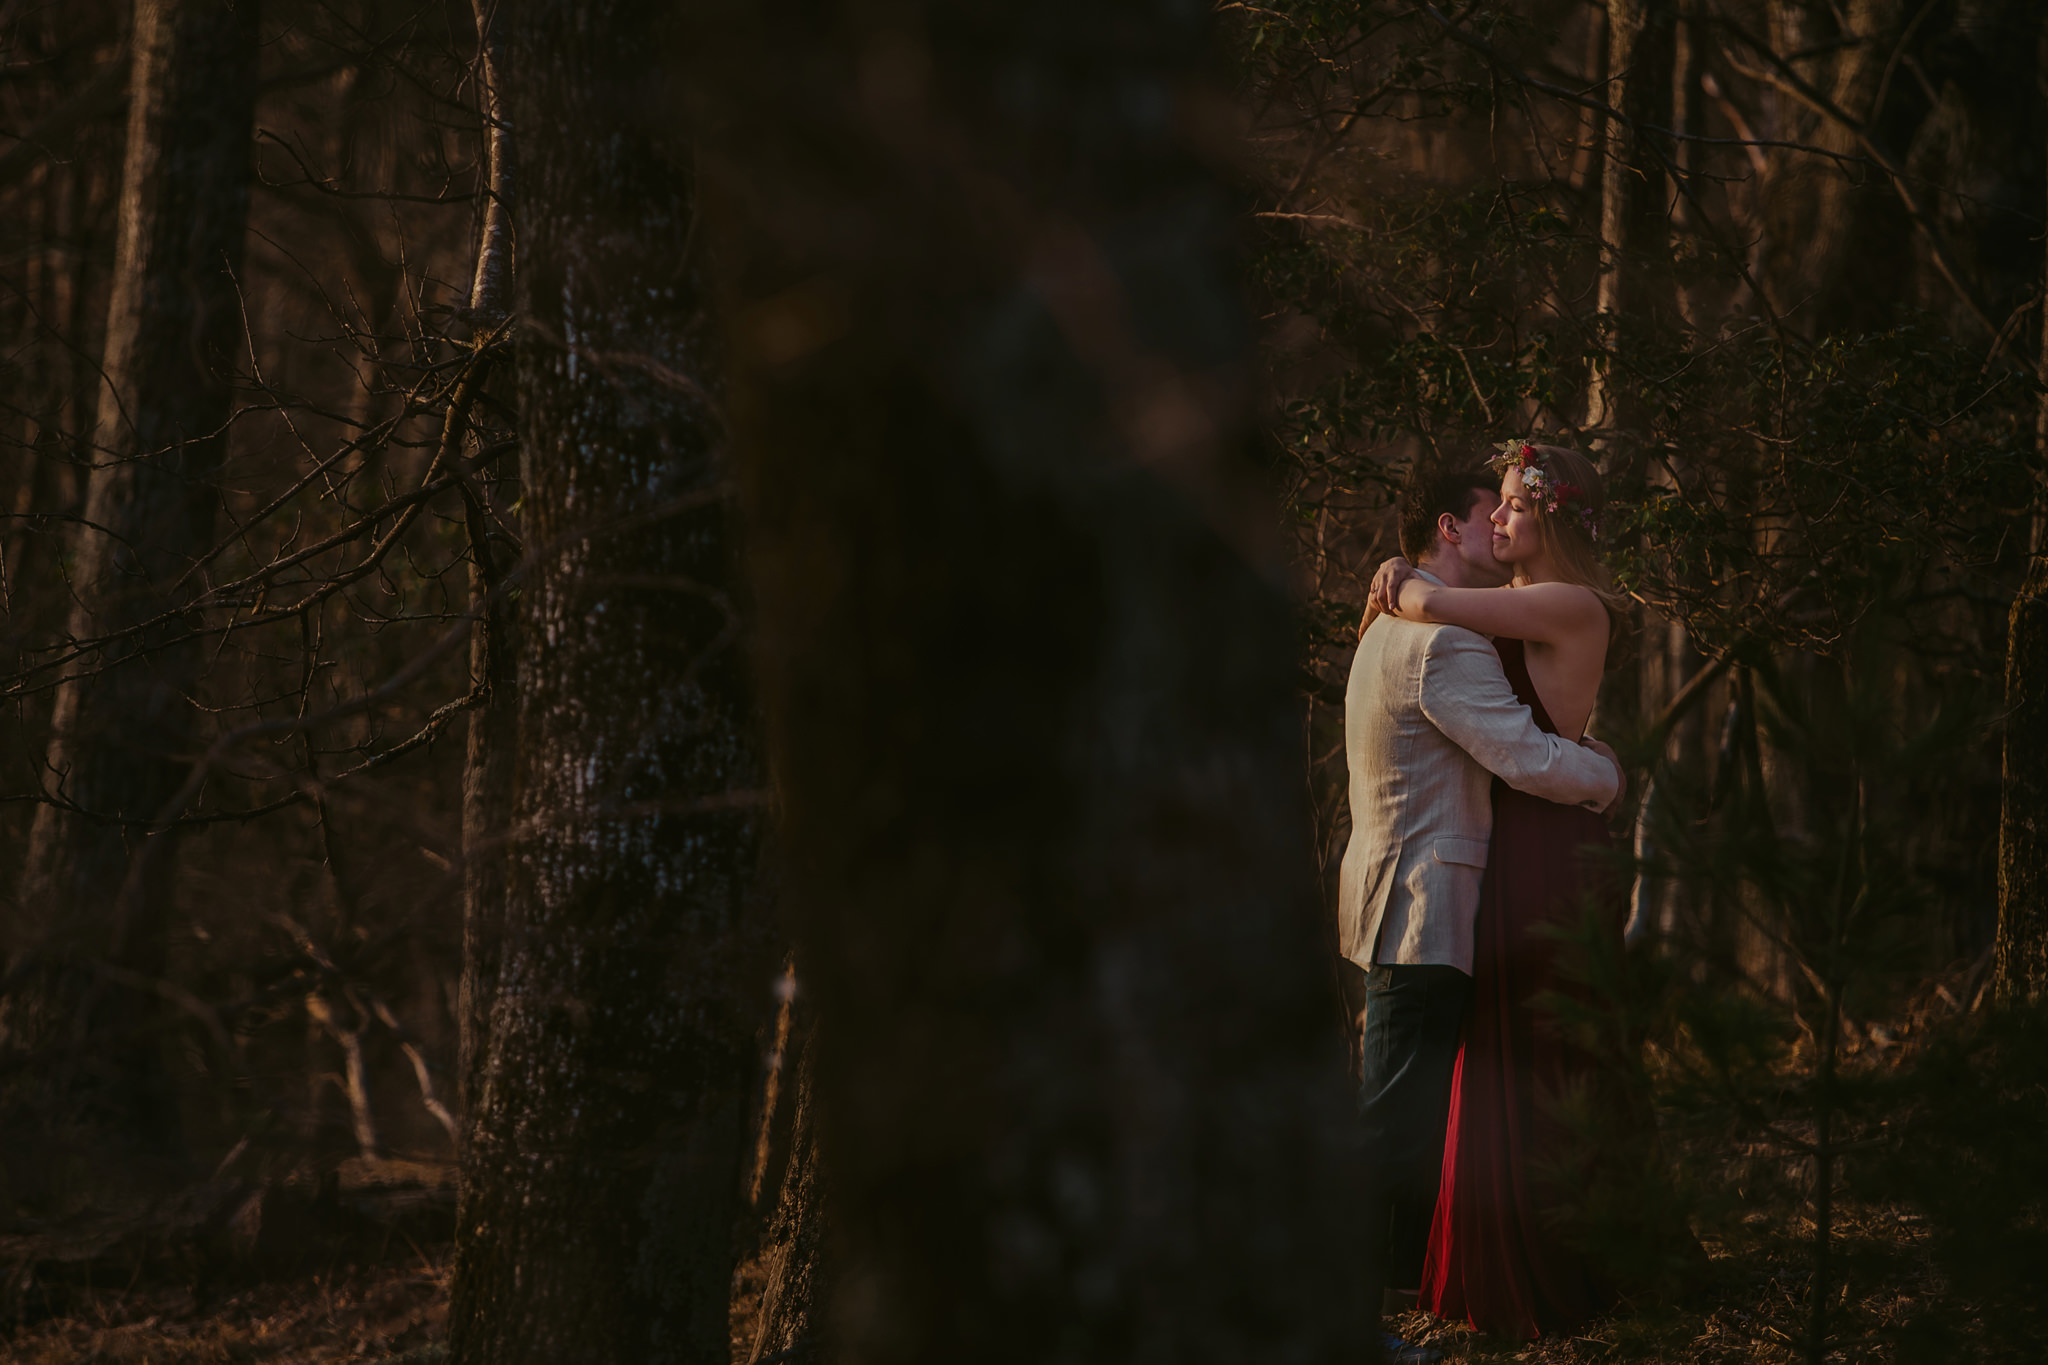 A beautiful couple embraces in the woods at Doughton Park near Sparta, NC. Photography by Mabyn.